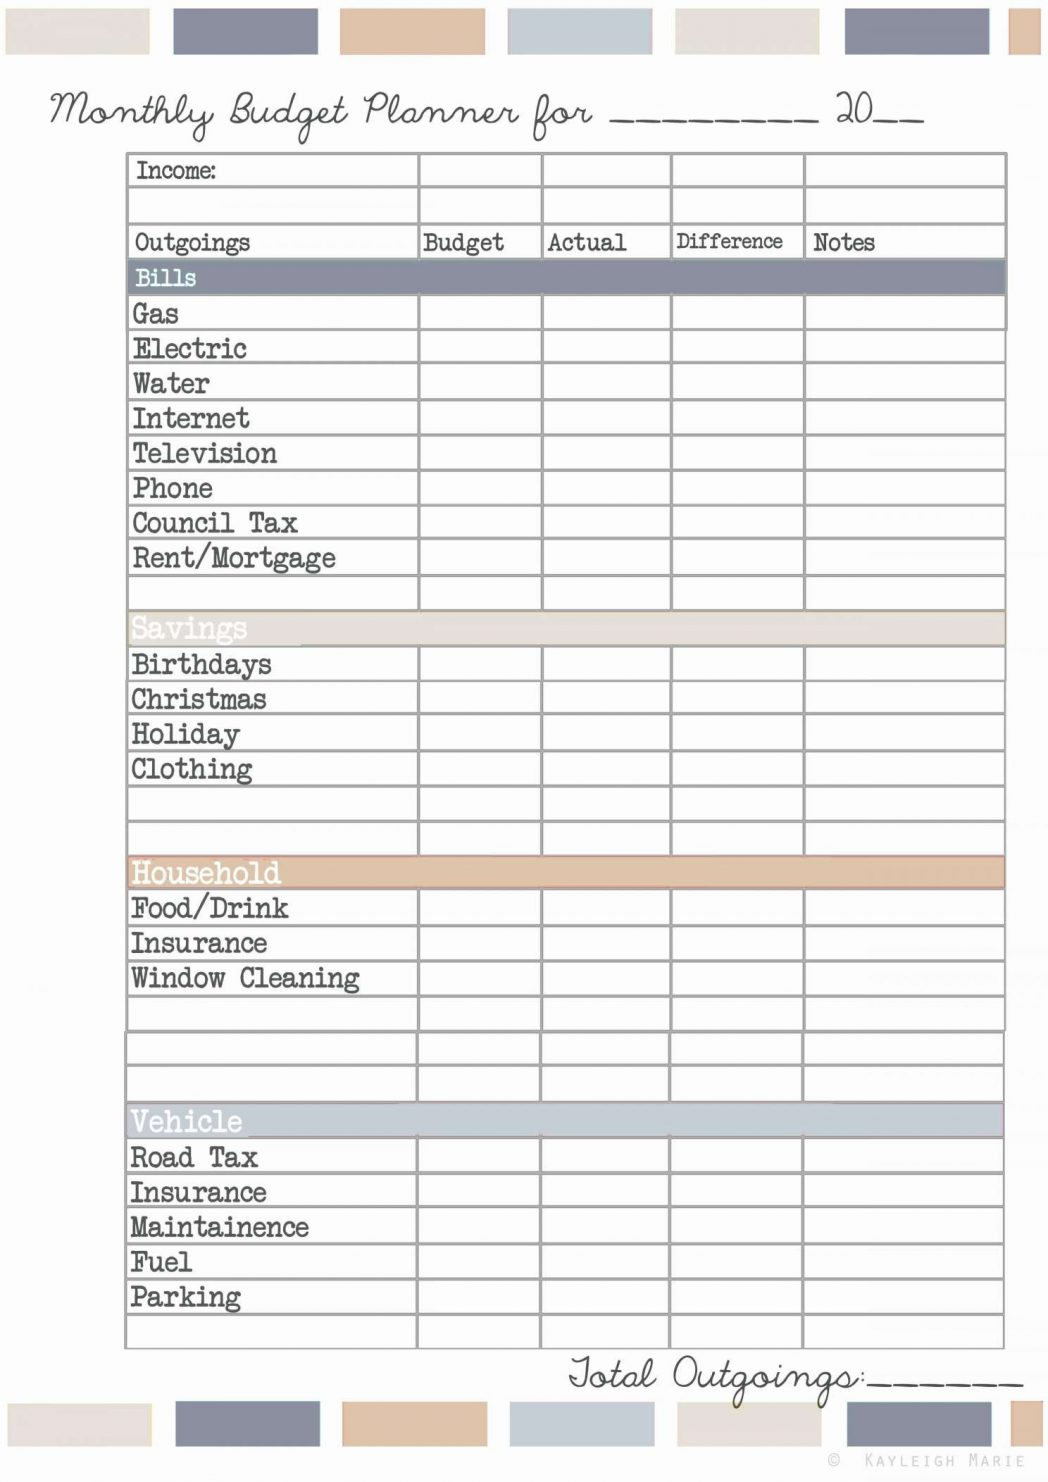 Buying A House Budget Spreadsheet Intended For Buying A House Budget Spreadsheet Collections Home Fr ~ Epaperzone